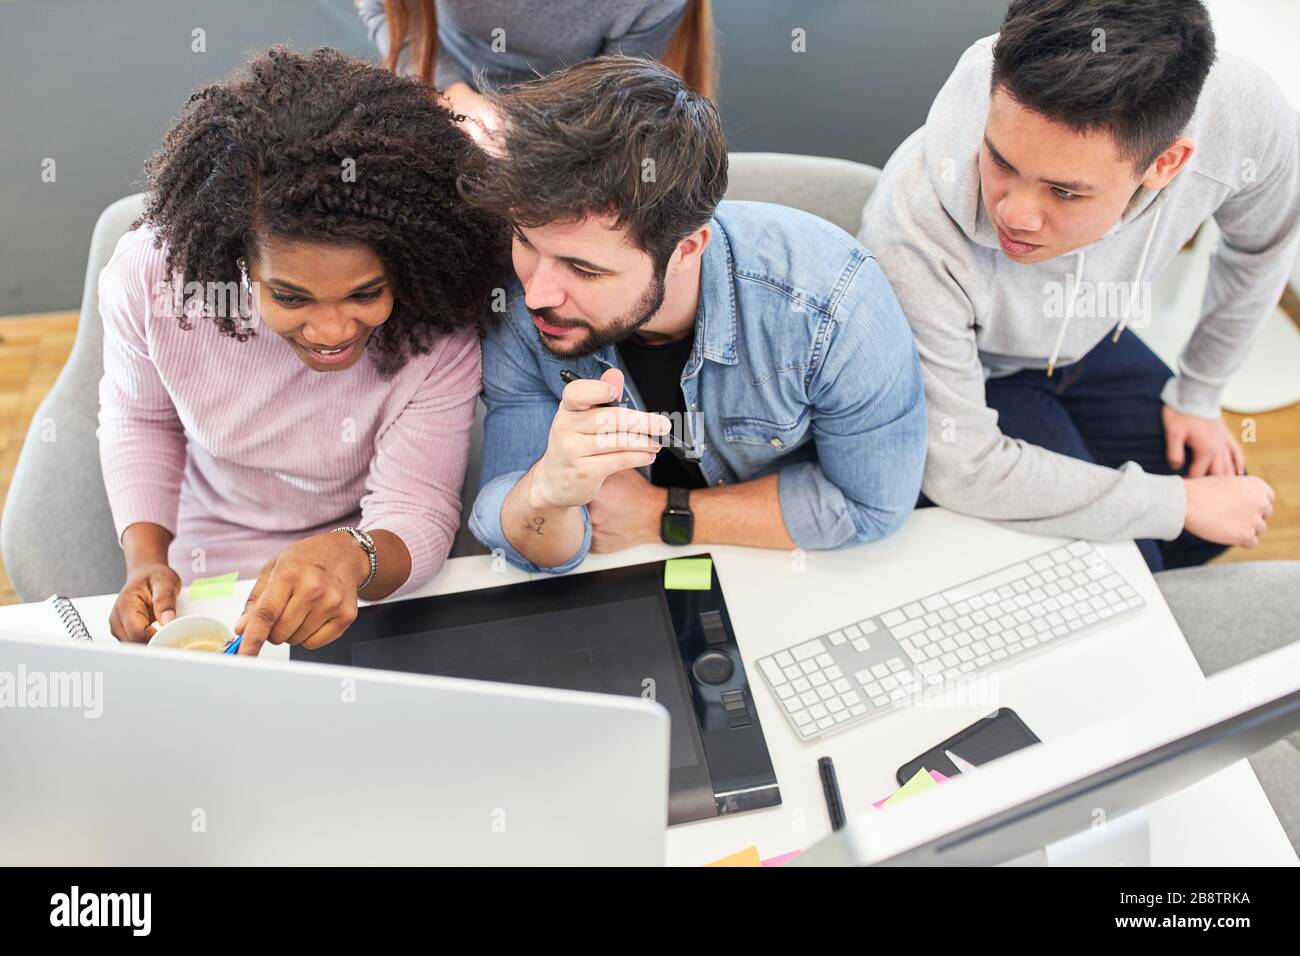 Web design team develops a design idea together on the computer in the office Stock Photo